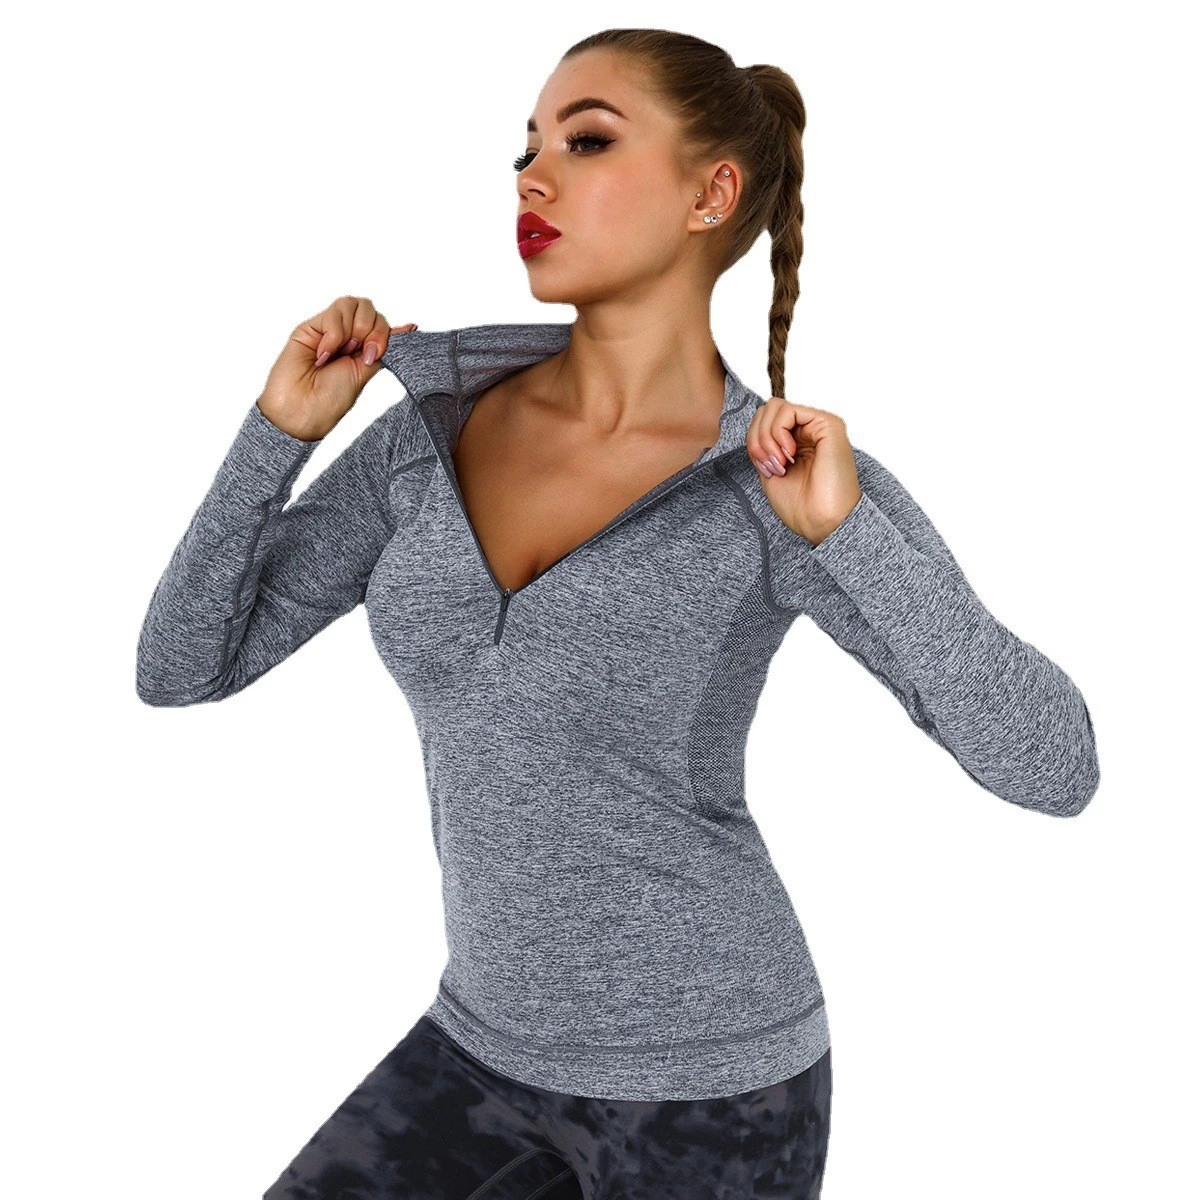 S-SHAPER Women's Sexy Fitness Active Sports Workout Zip Up Long Sleeve Sweetshirt Athletic Yoga Crop Top Wholesales